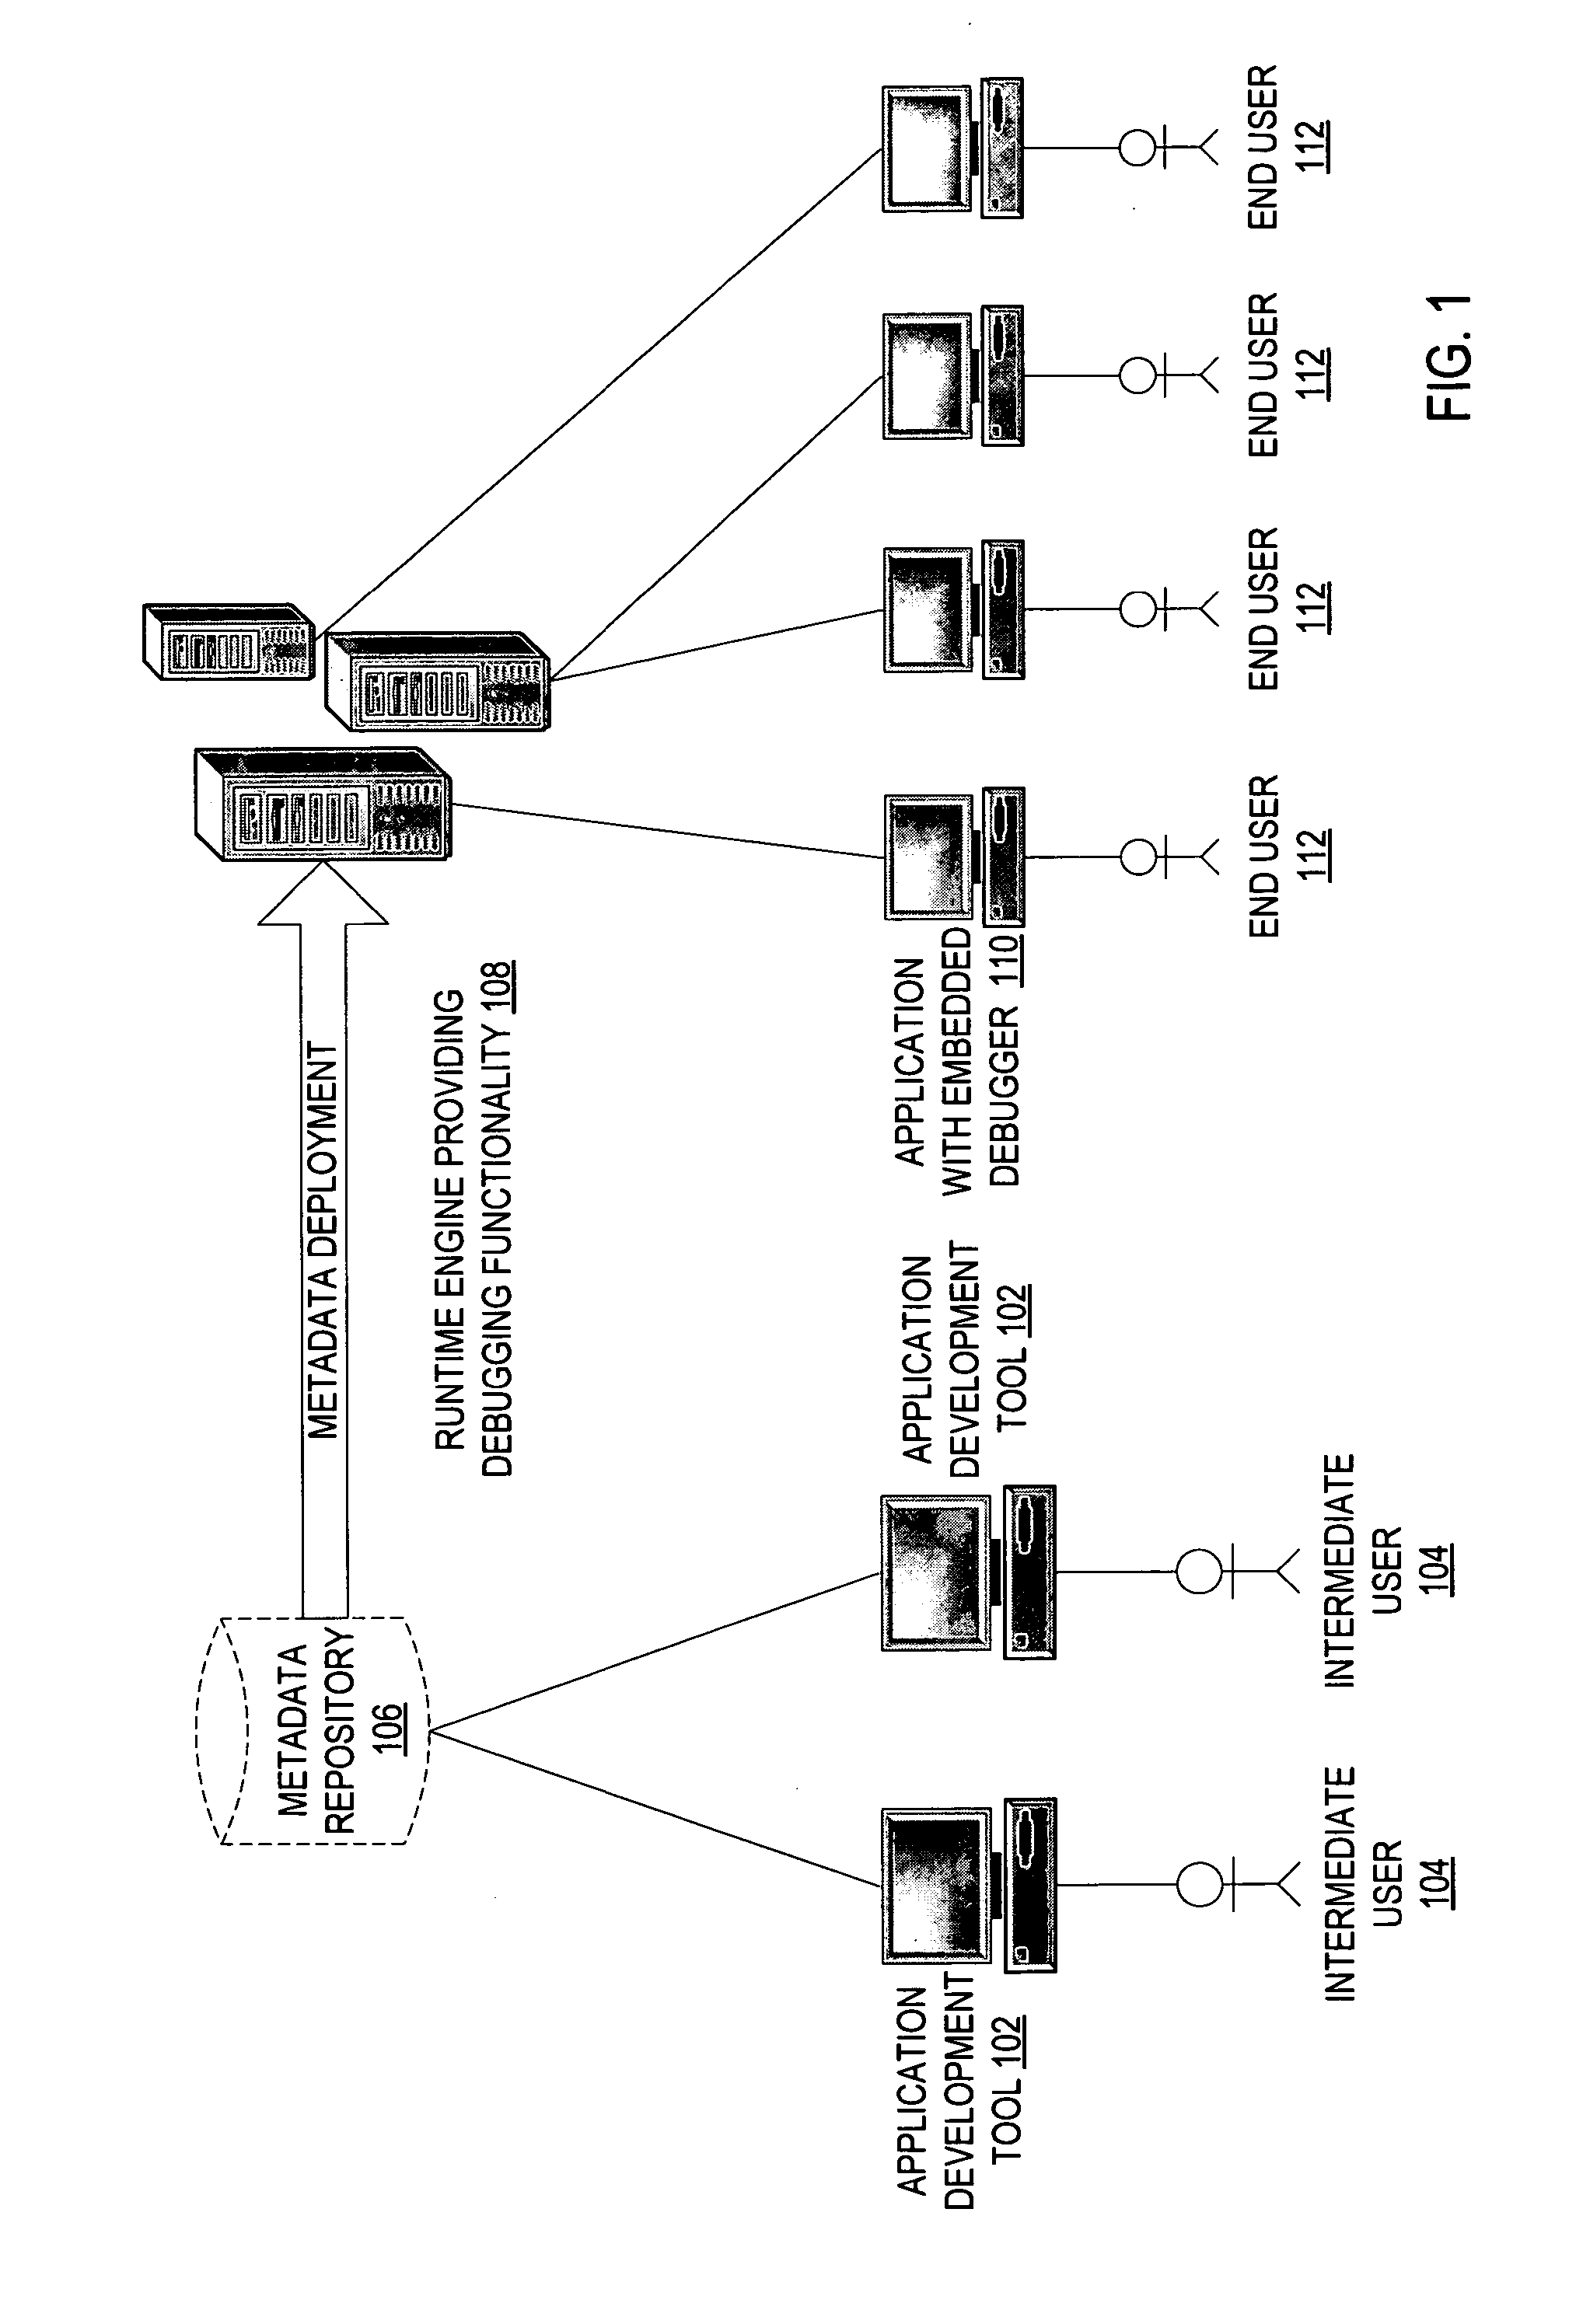 Debugging functionality embedded in an application